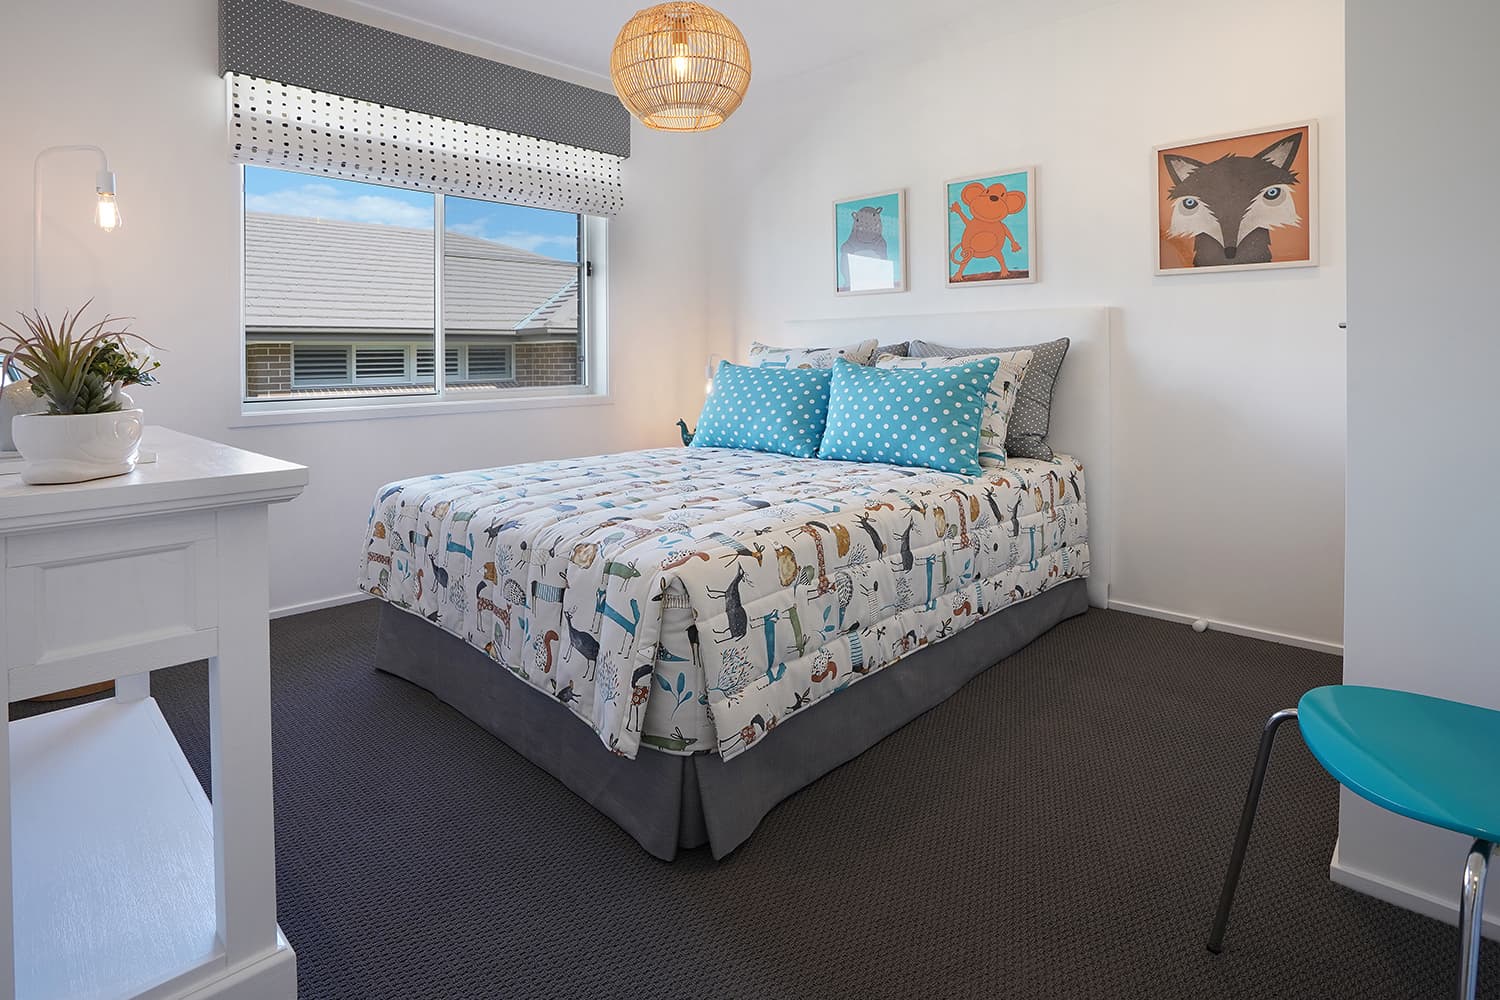 Harmony Four 23 - Bedroom image. On display at Housing World Nowra